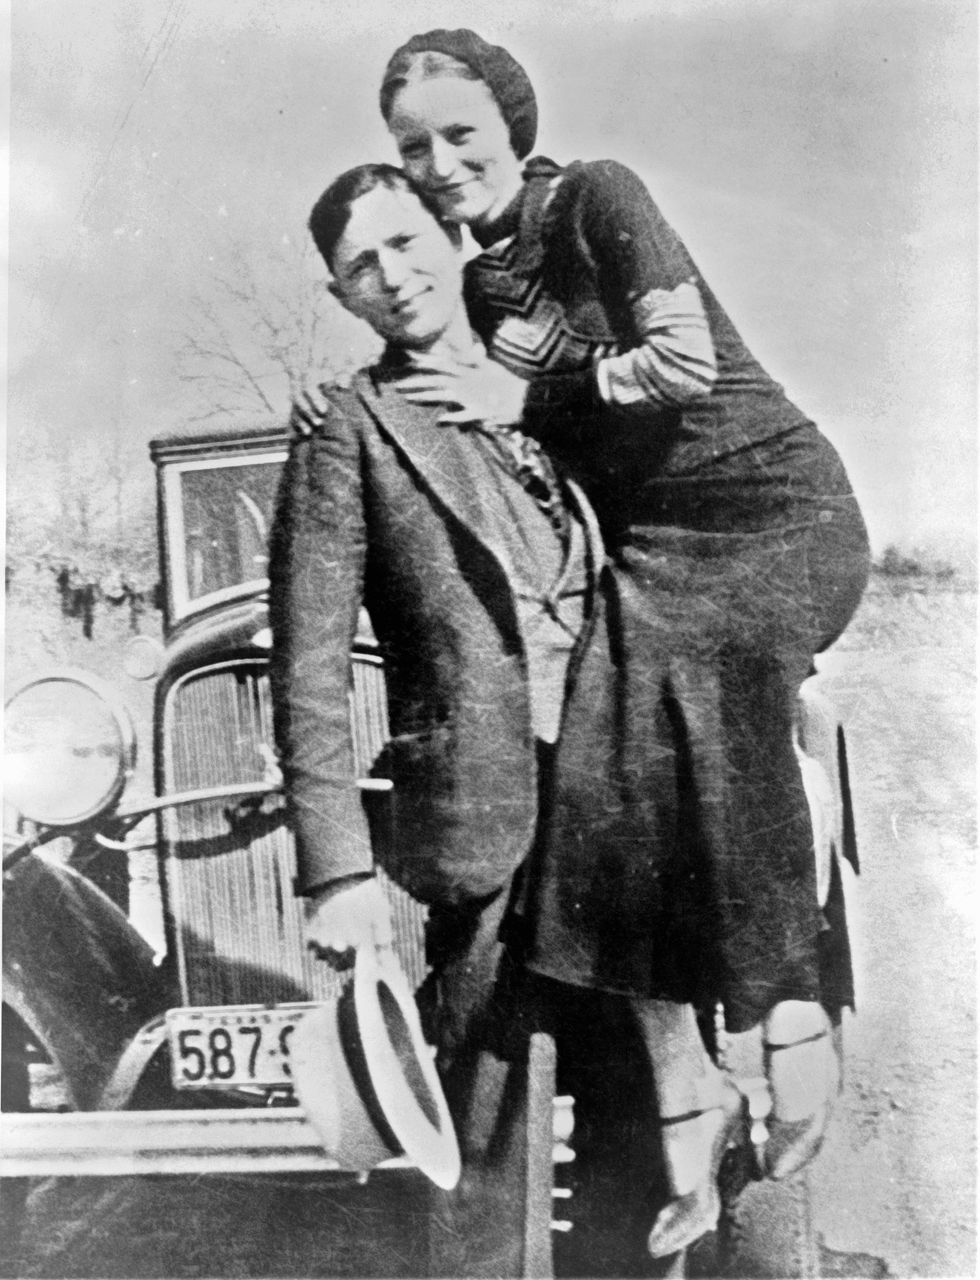 "The Last Ride of Bonnie and Clyde"